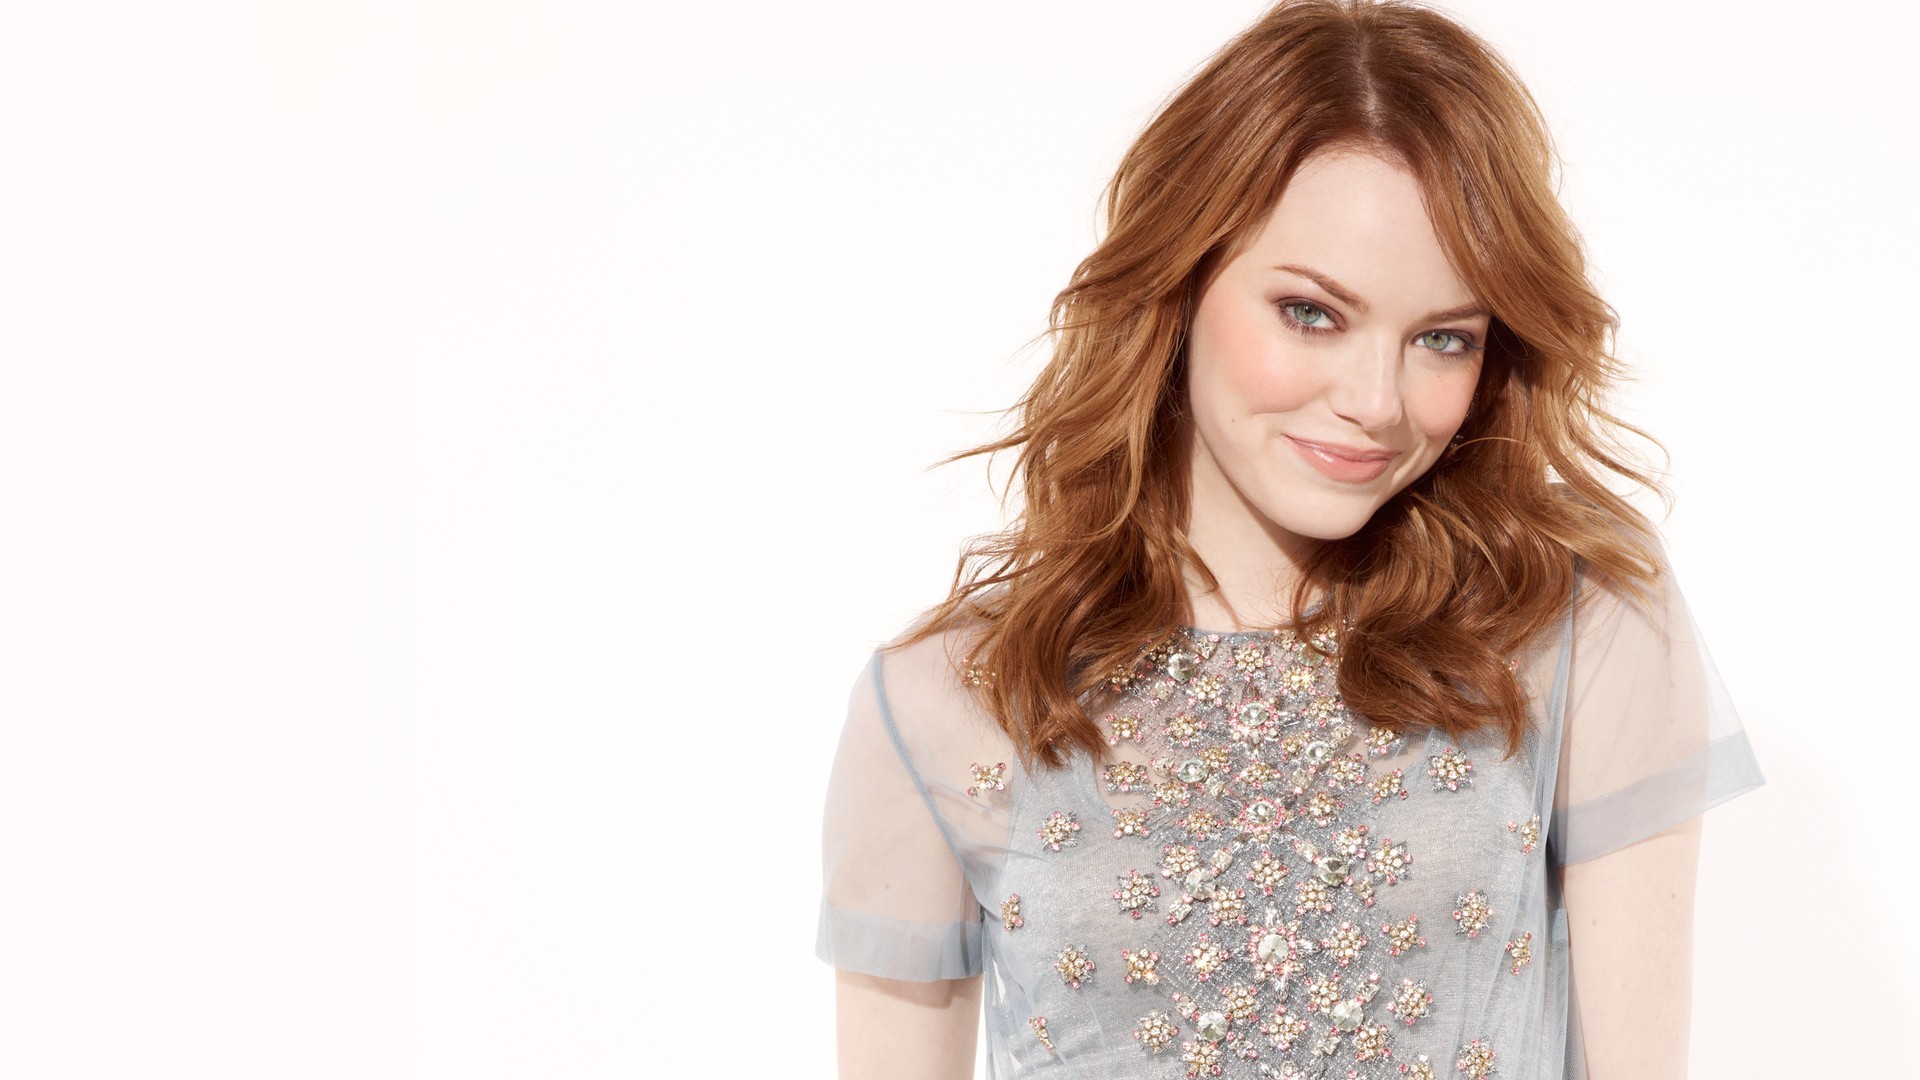 People 1920x1080 women Emma Stone redhead actress auburn hair smiling long hair see-through blouse studio simple background white background